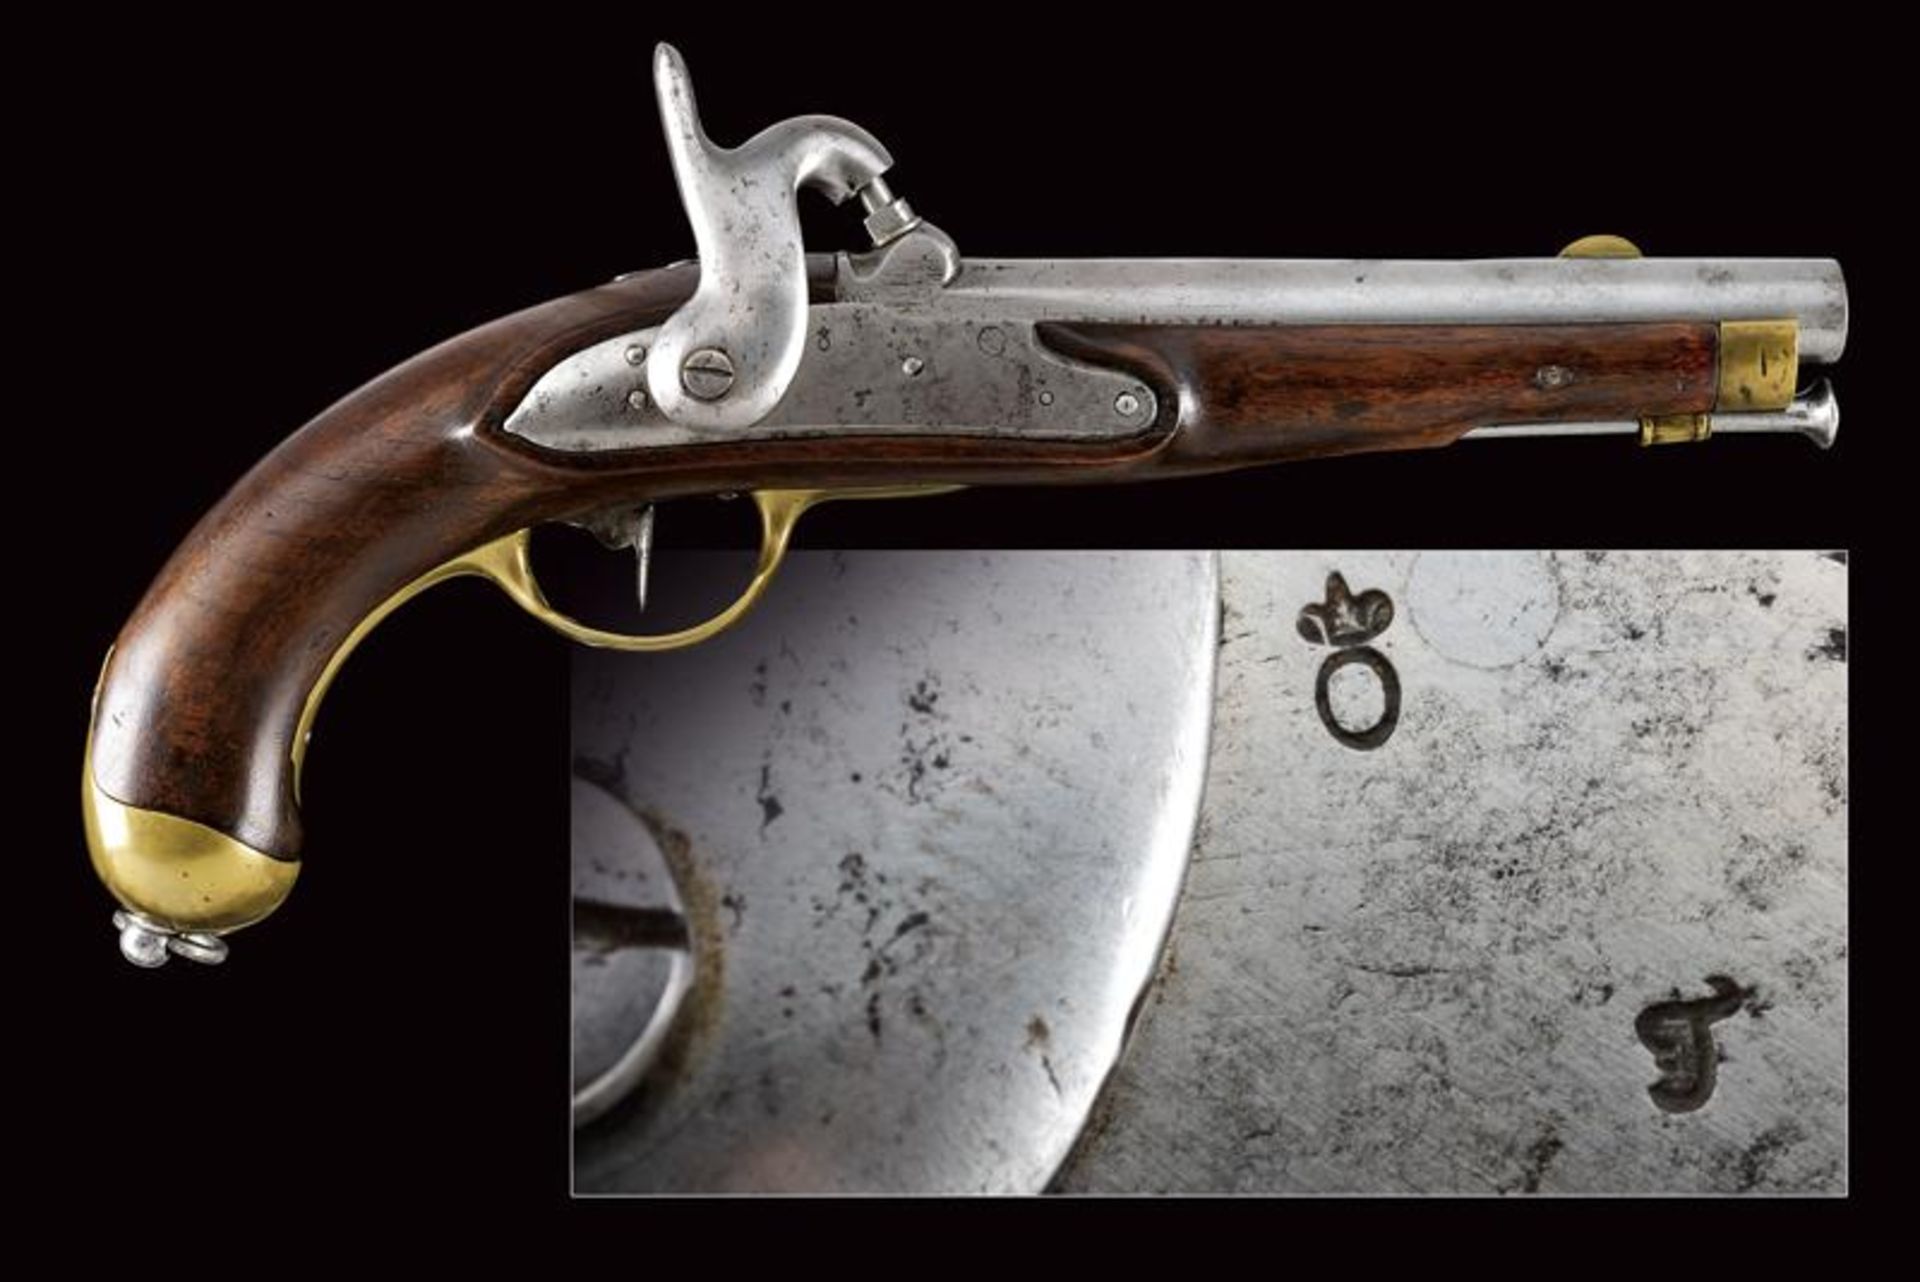 An 1839 Mod. gendarmerie trooper's pistol converted to percussion